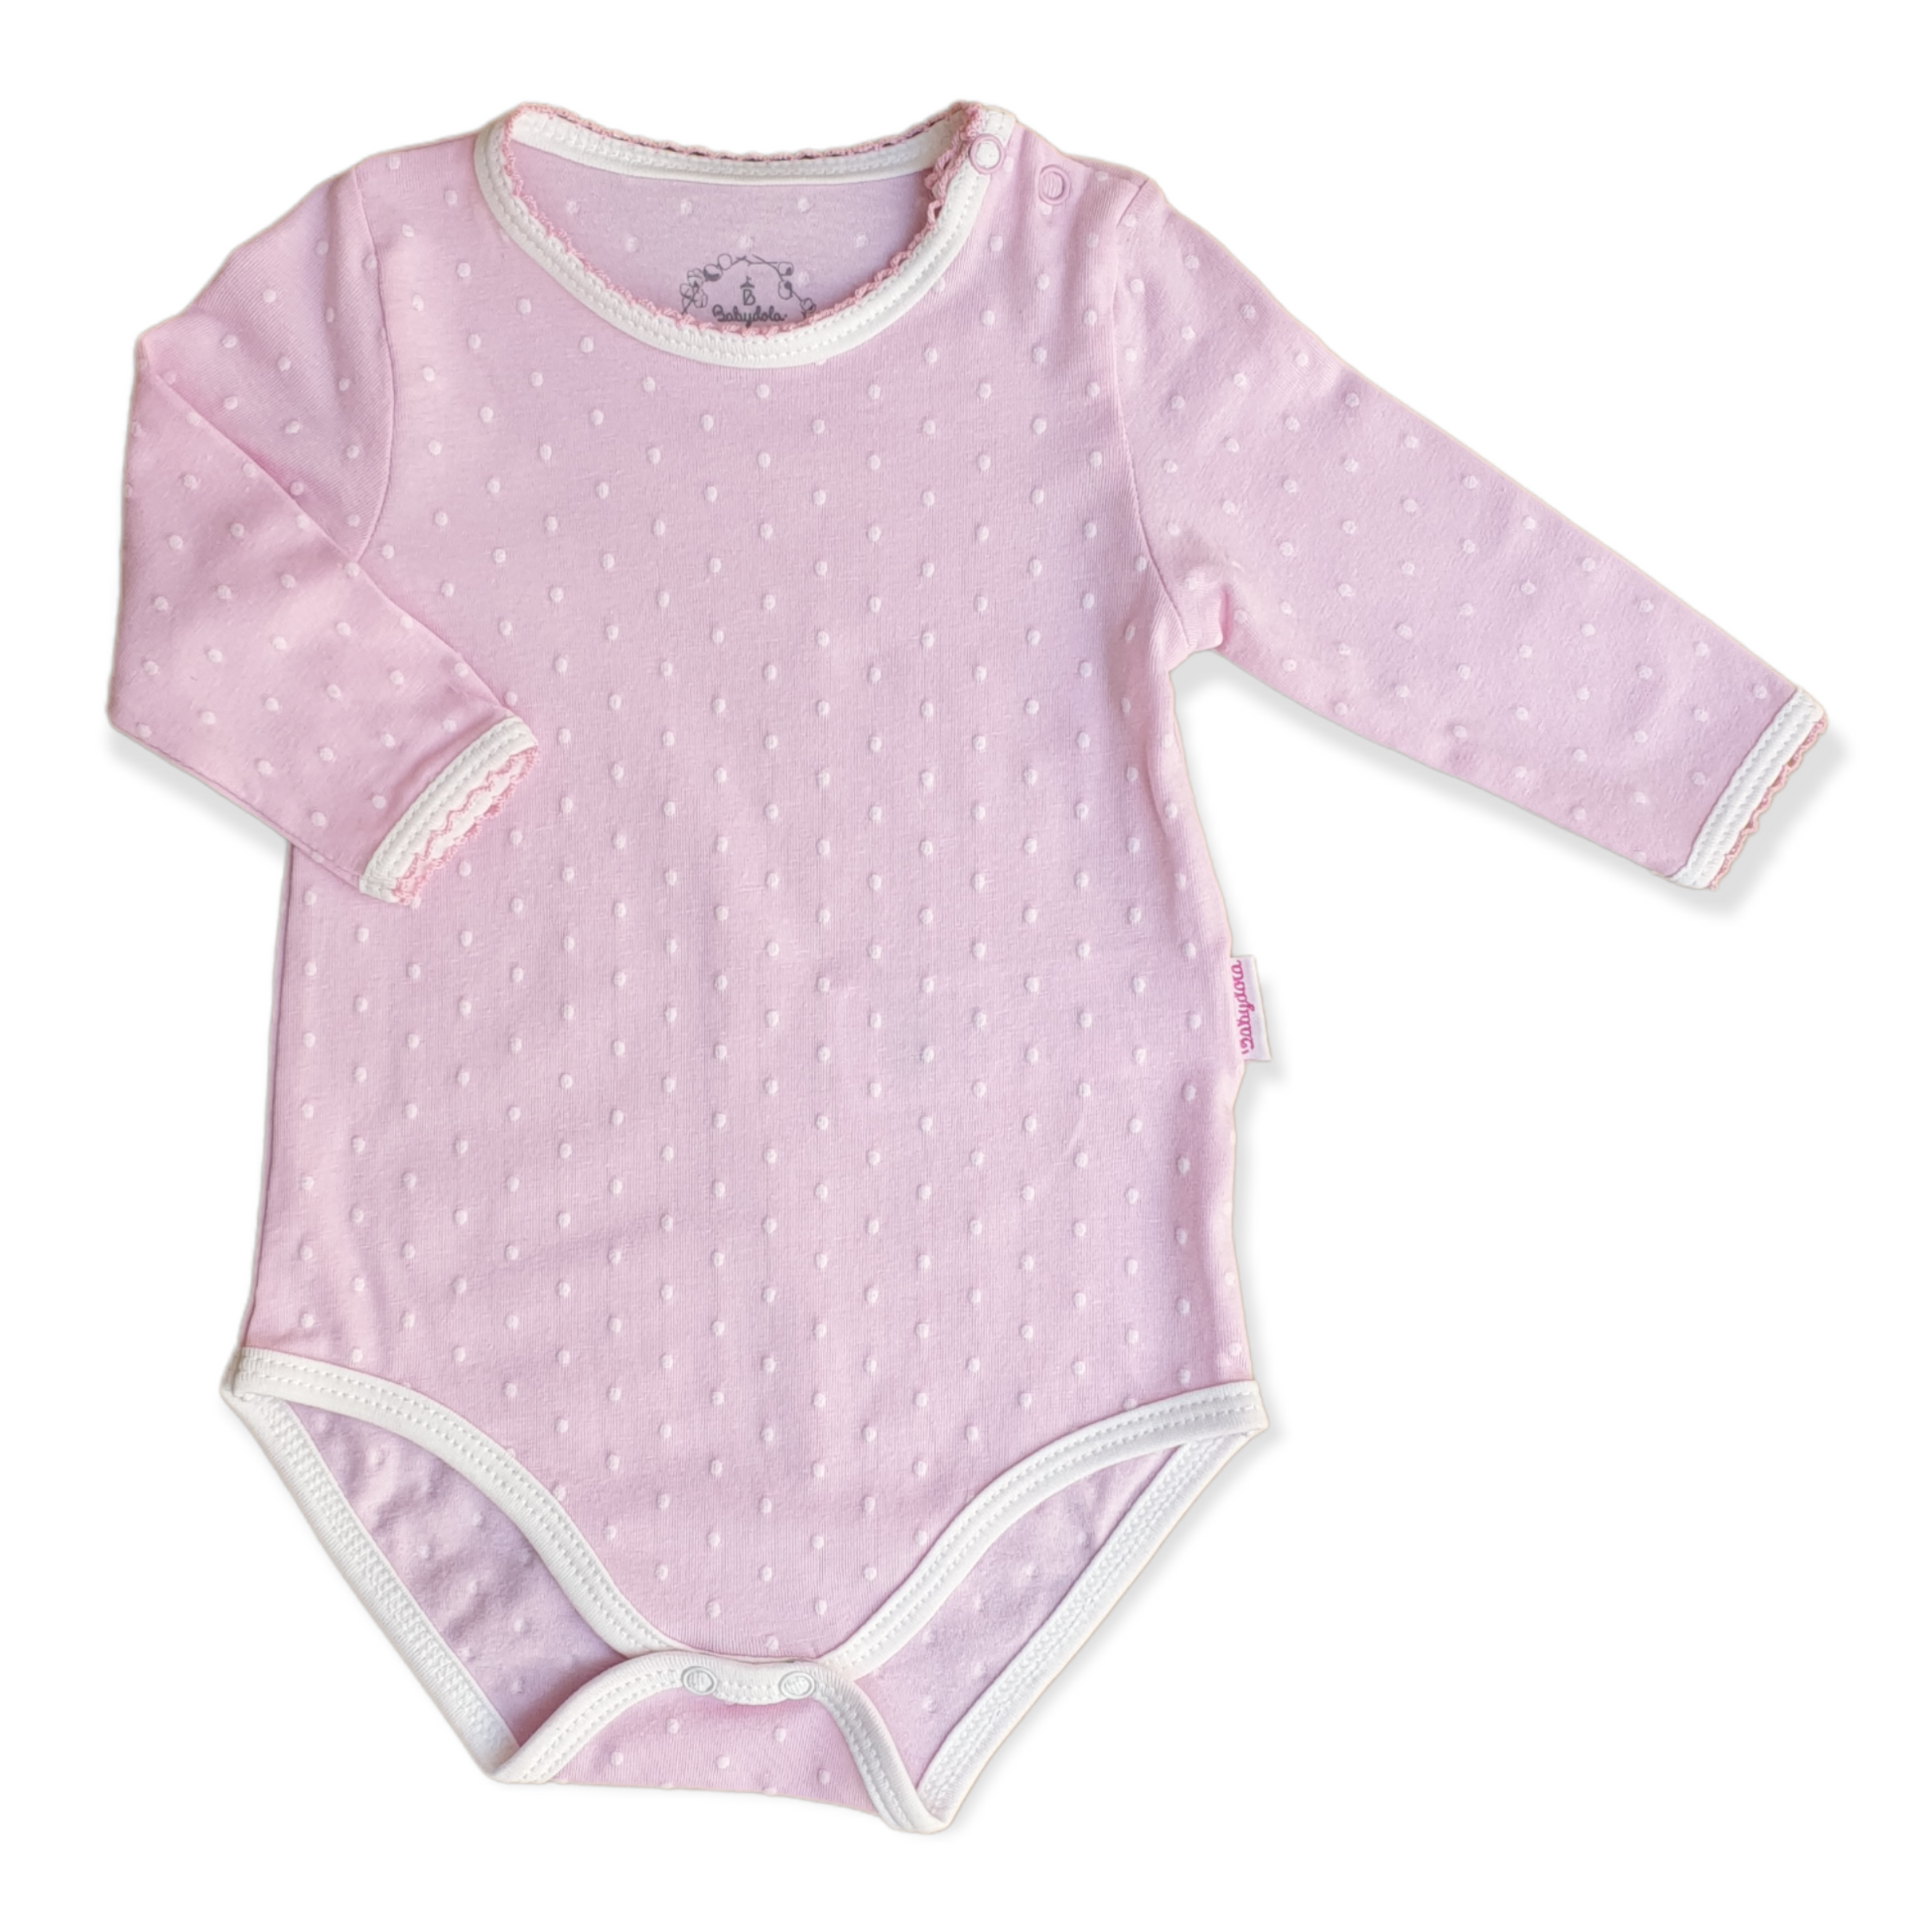 Babydola - Organic Cotton Long Sleeve Off-White Dotted Baby Girl Body